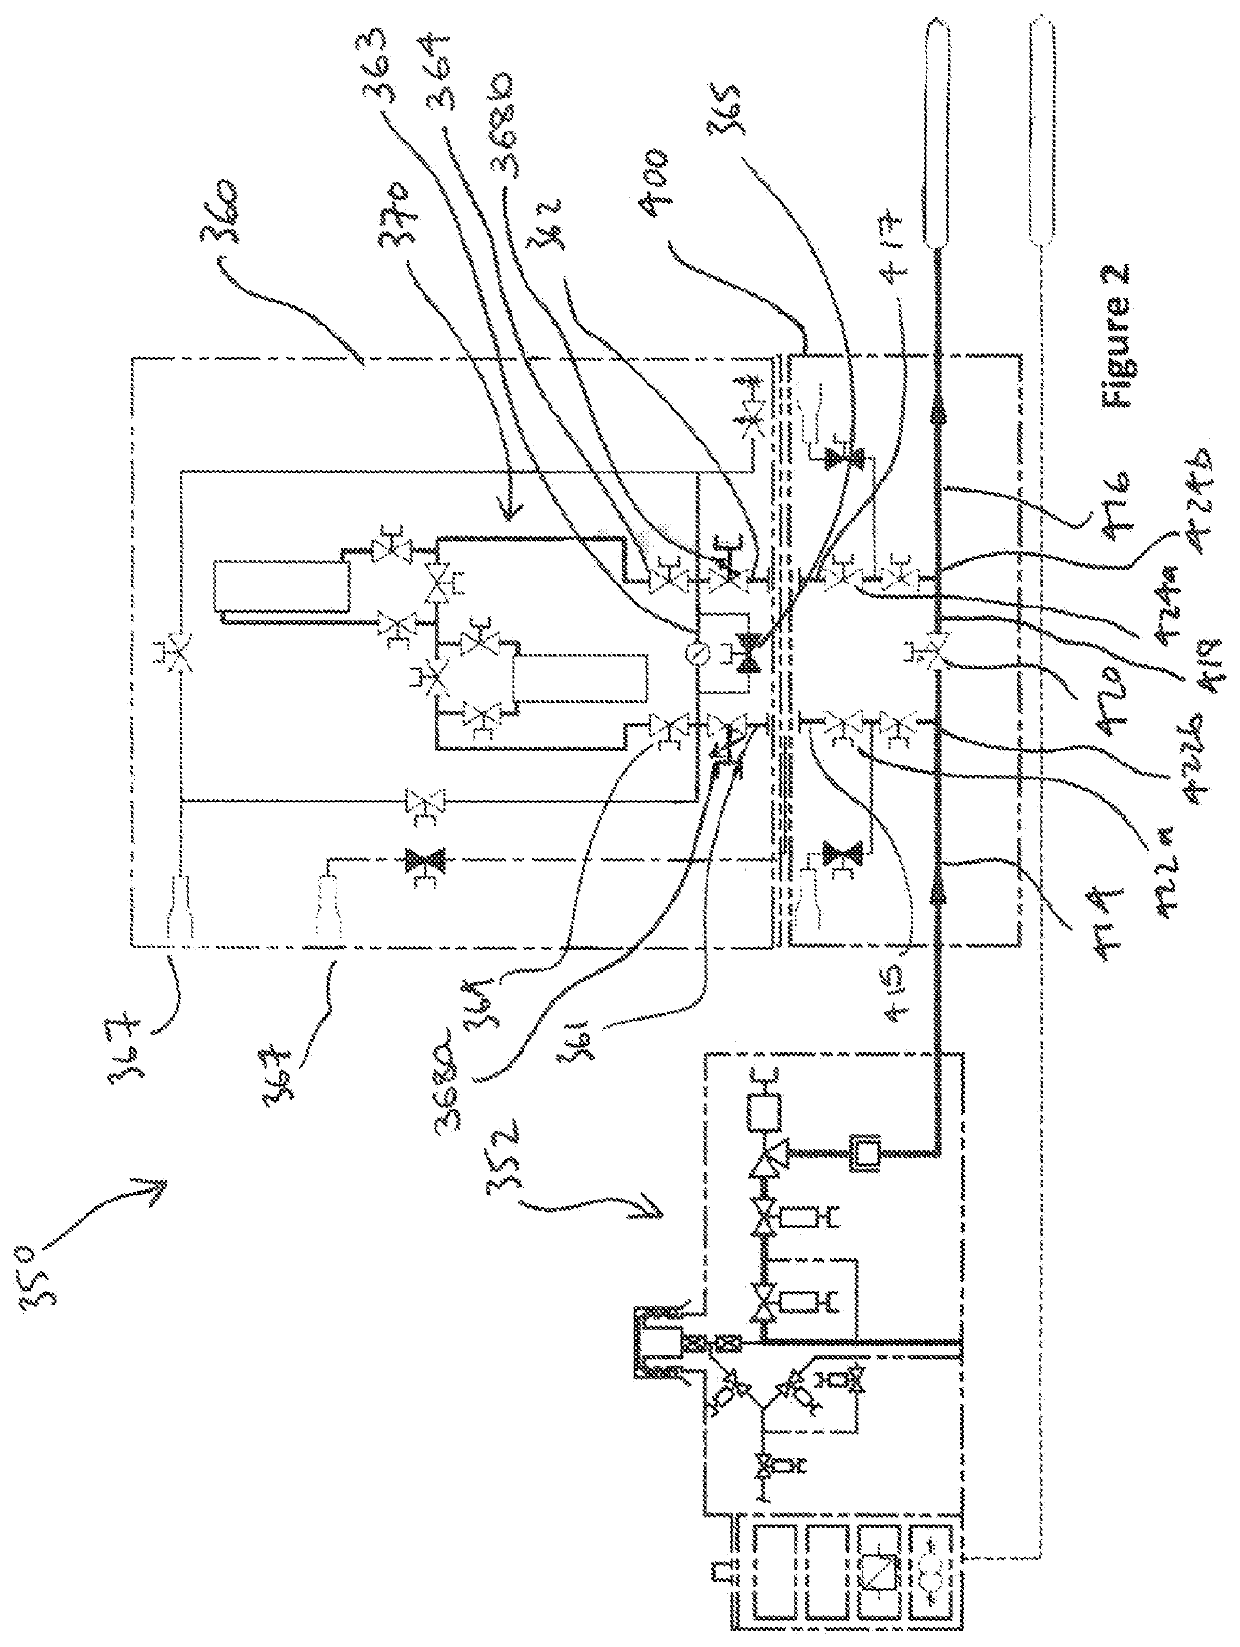 Apparatus, systems and methods for oil and gas operations